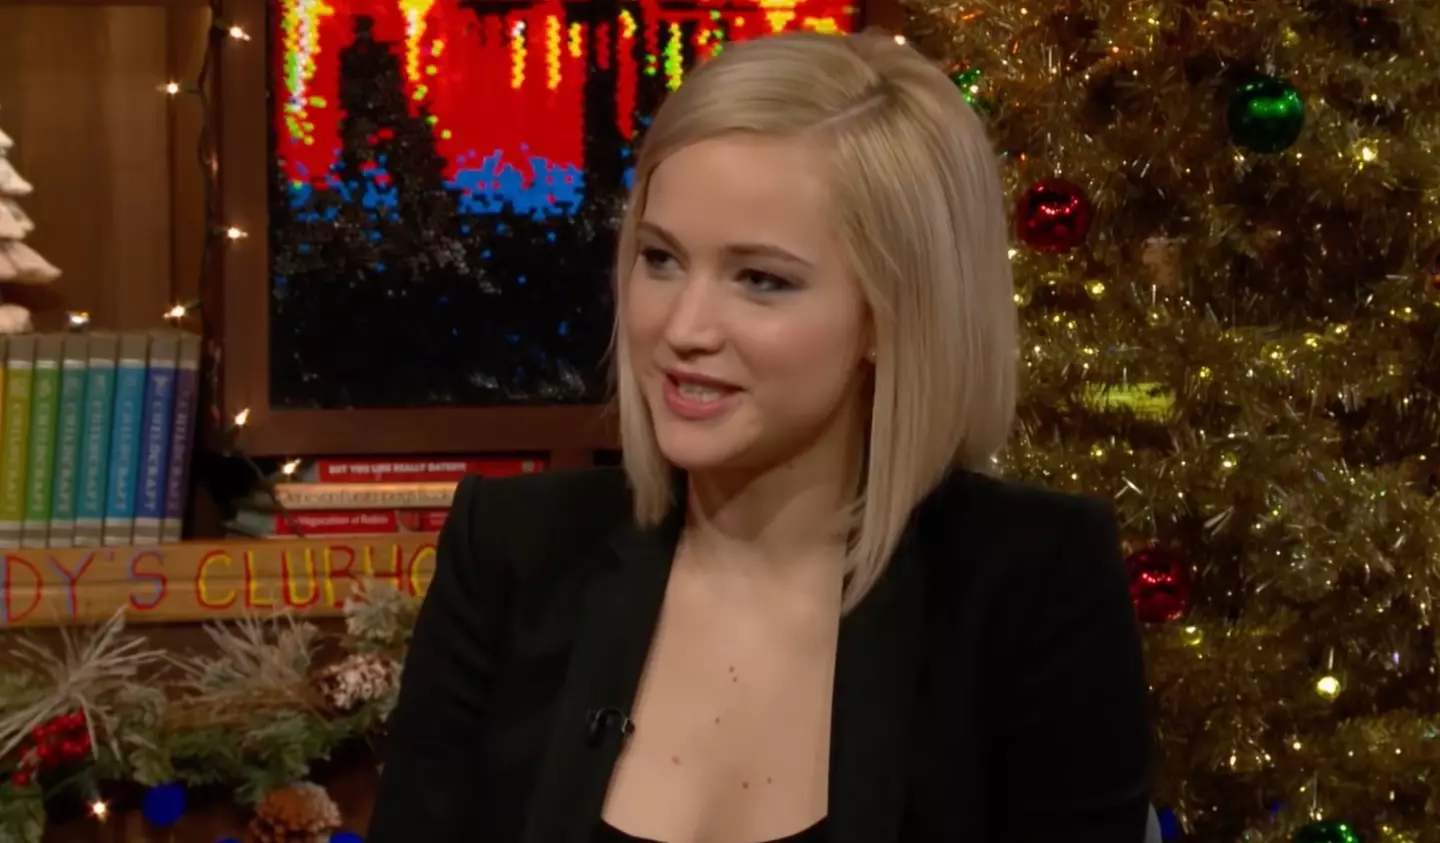 Jennifer Lawrence kept her cards close to her chest regarding her alleged romance with Chris Martin.